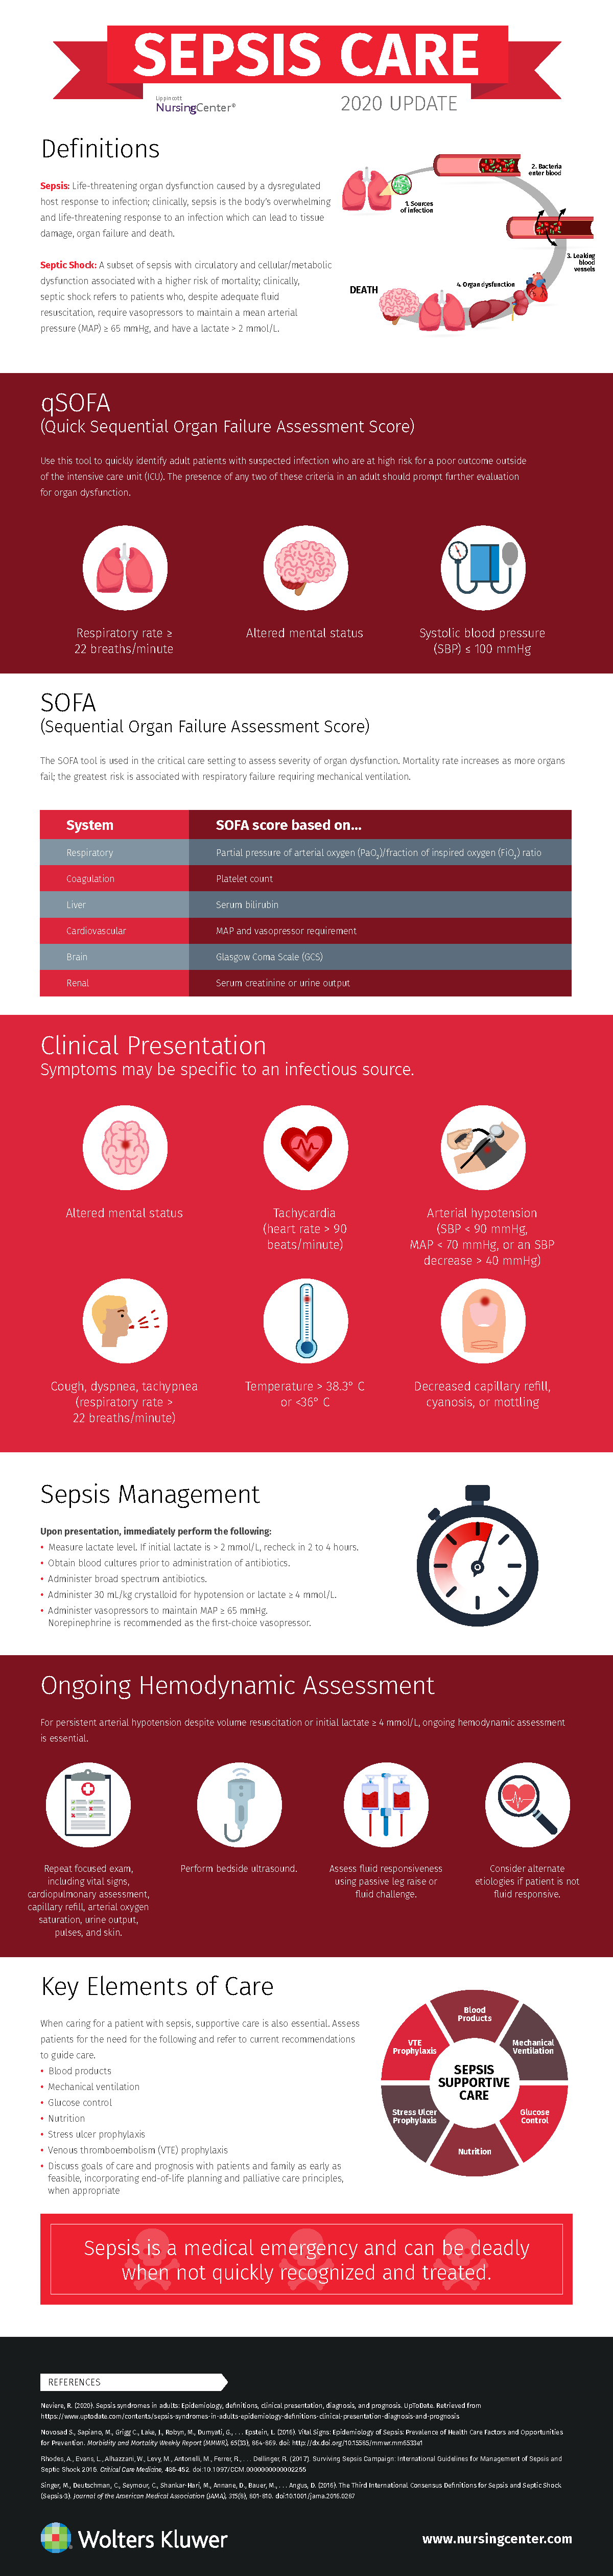 Sepsis Guidelines and Protocols: Providing Care to Patients